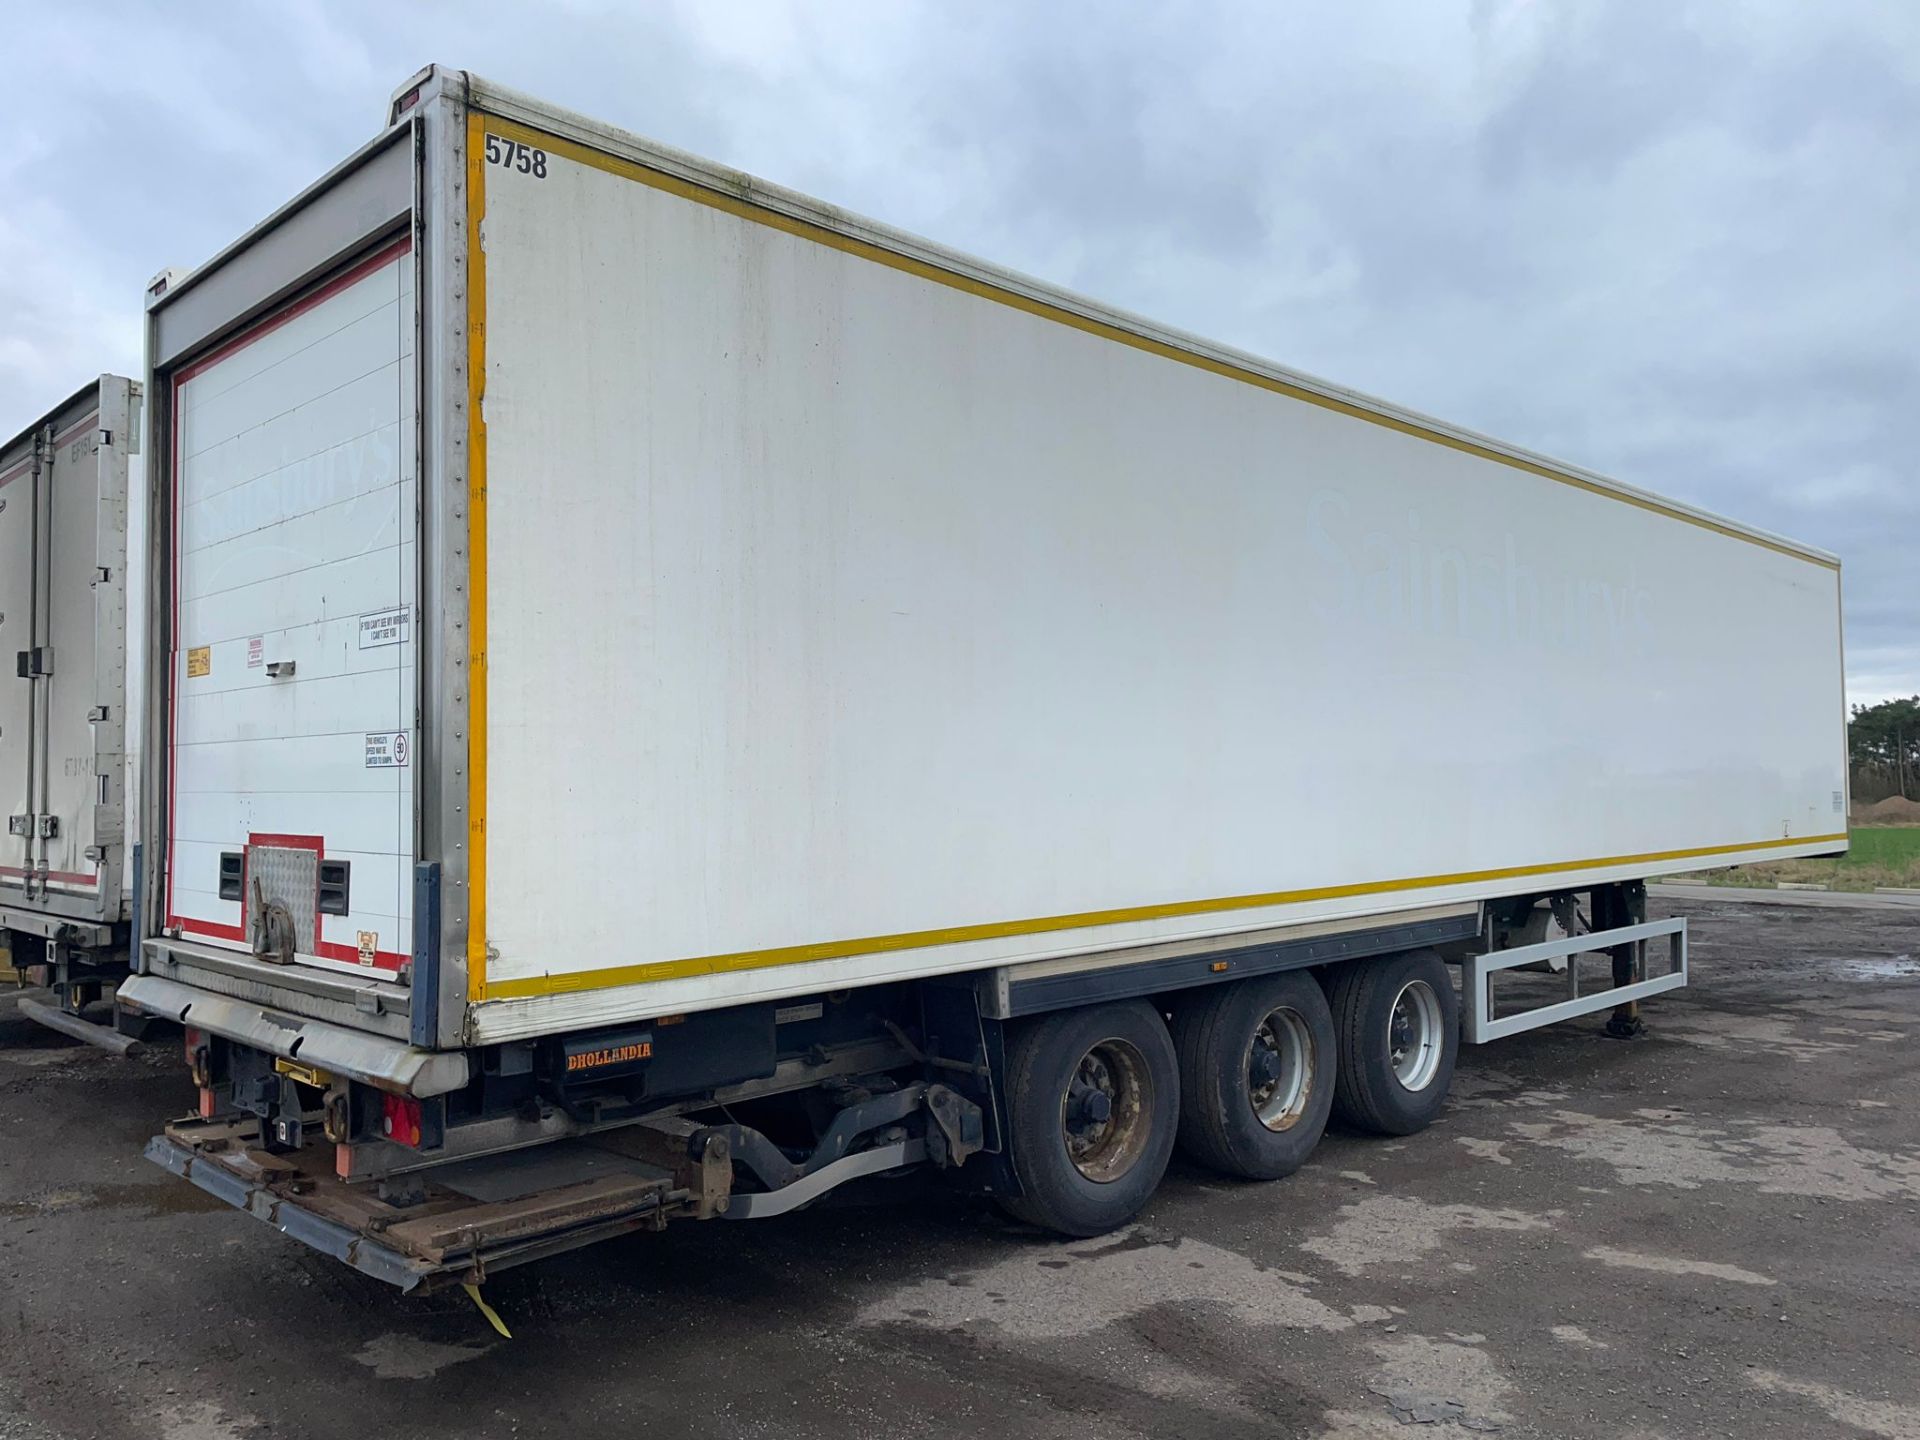 65758XCT – 2015 Montracon 13.6m Refrigerated Trailer - Image 5 of 12